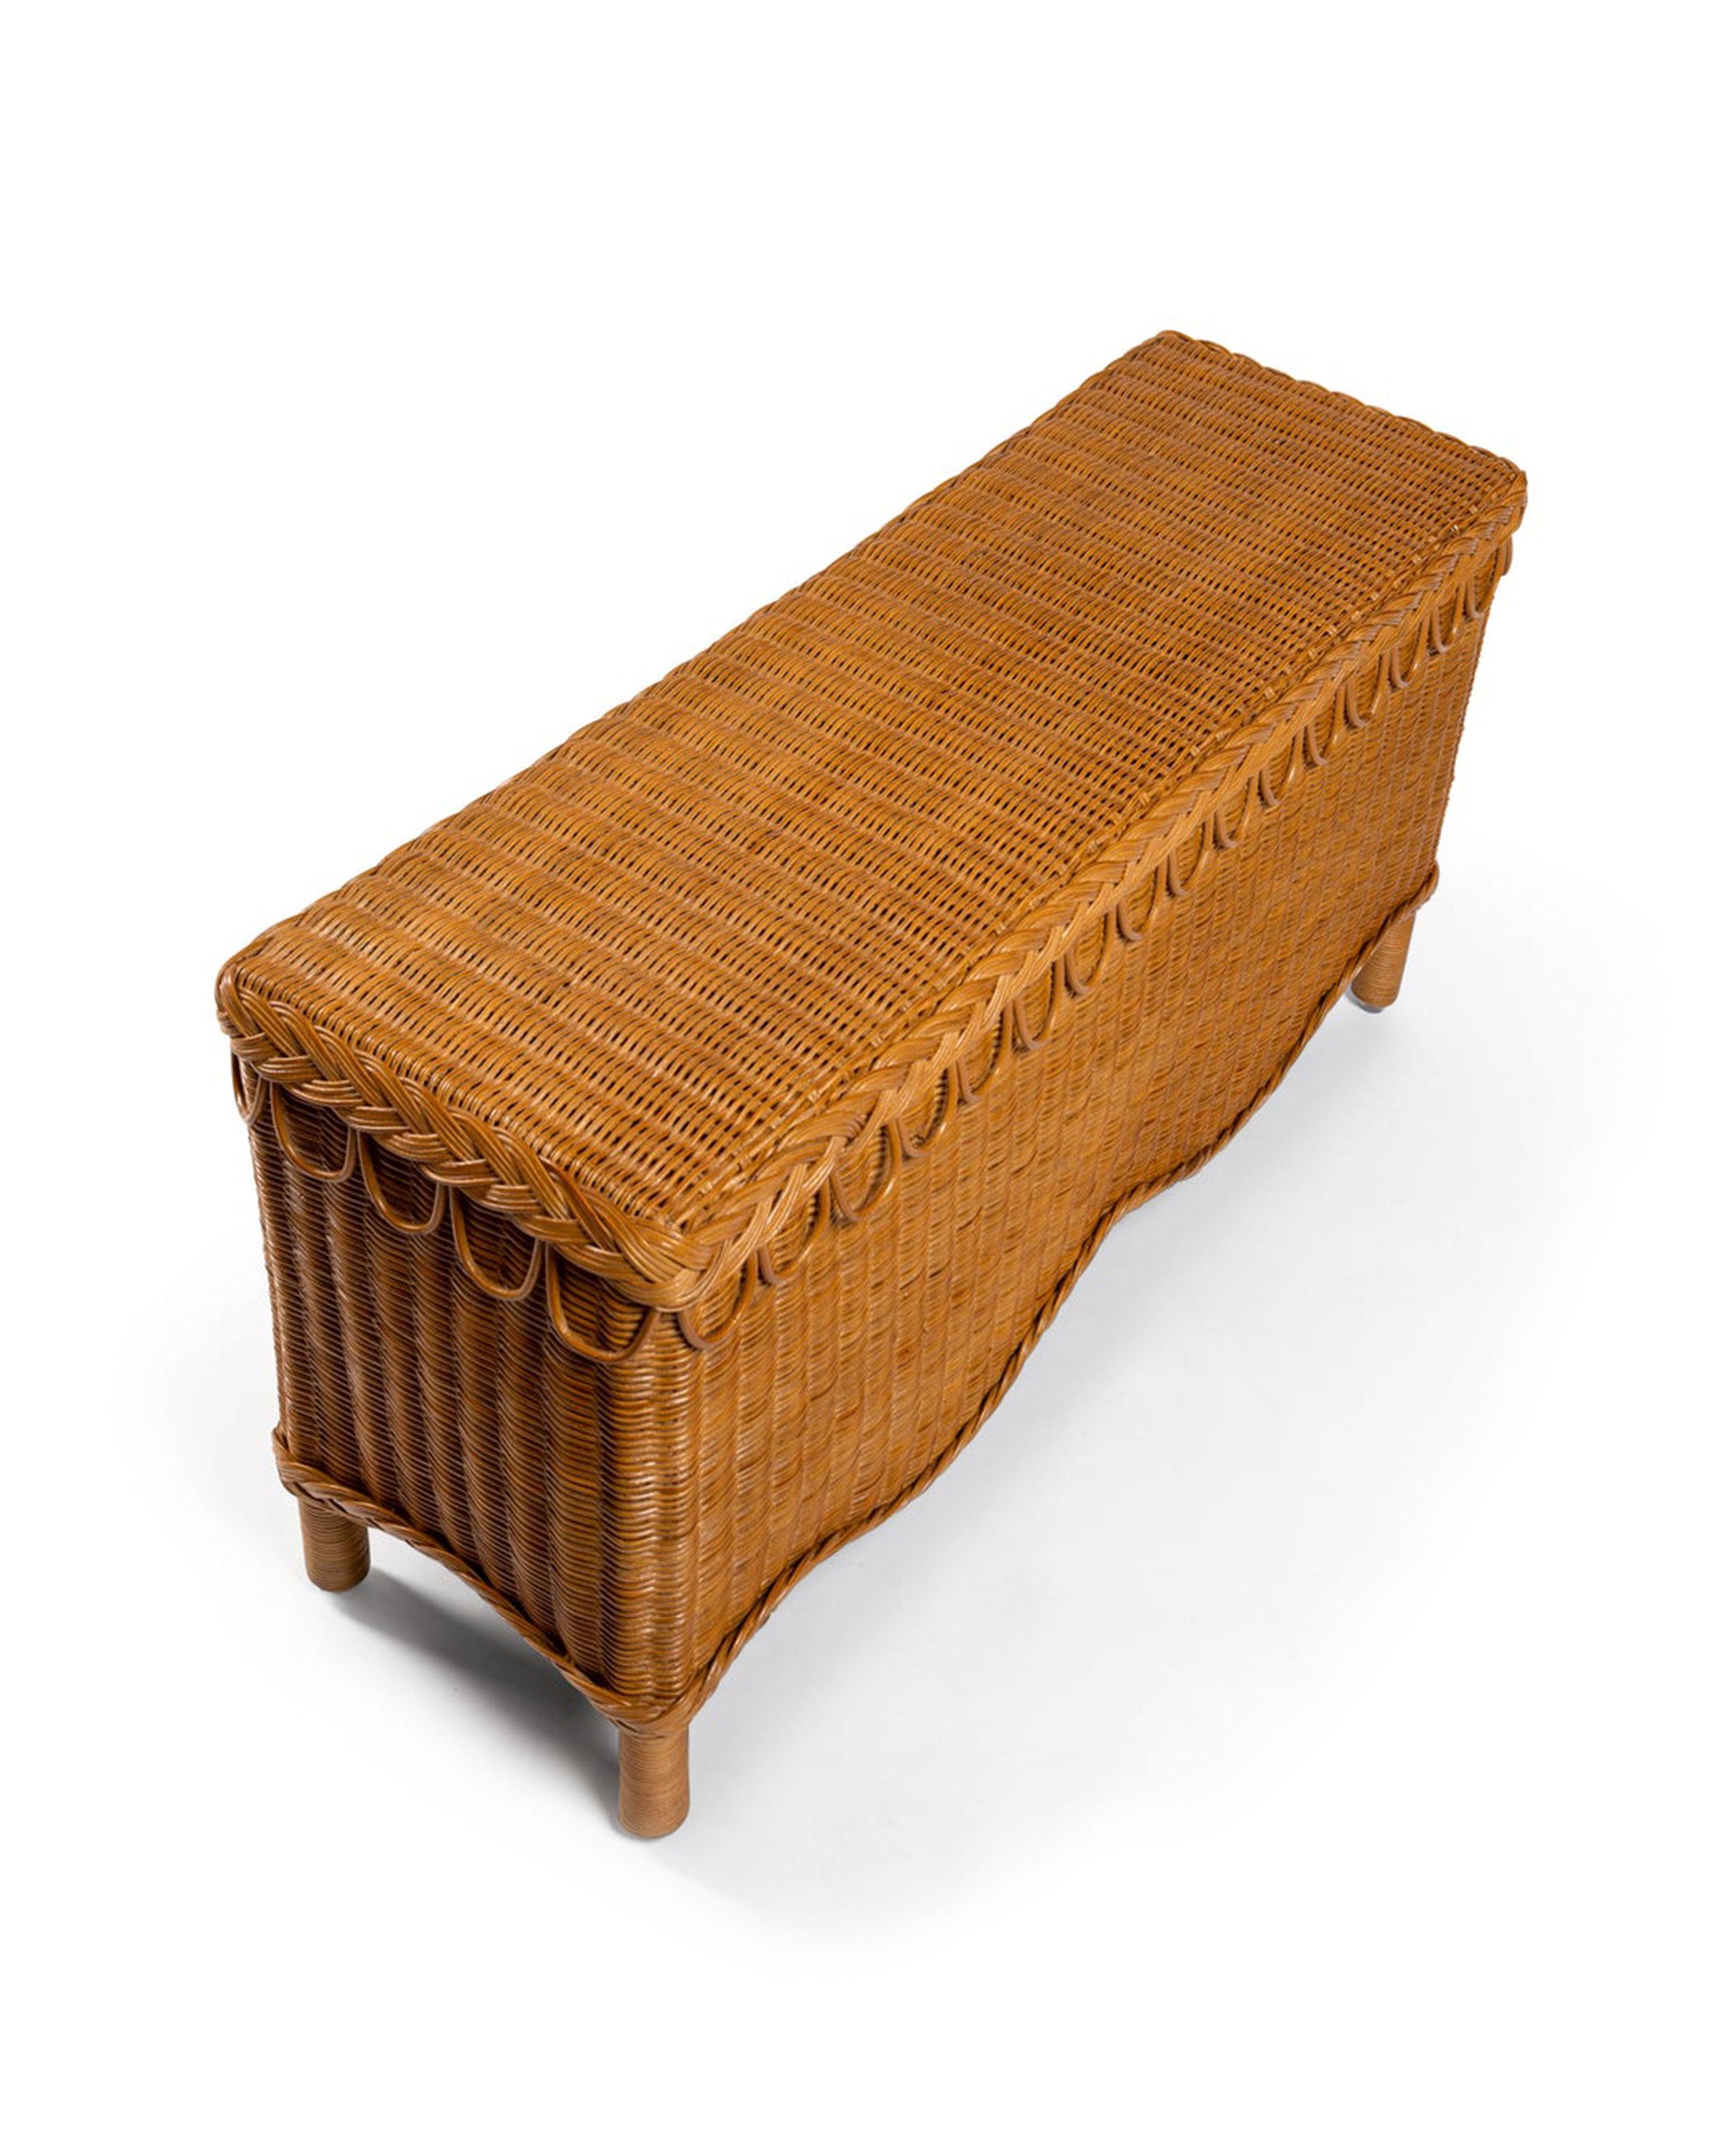 Indonesian Bunny Bench in Natural Honey Rattan, Modern furniture by Louise Roe For Sale